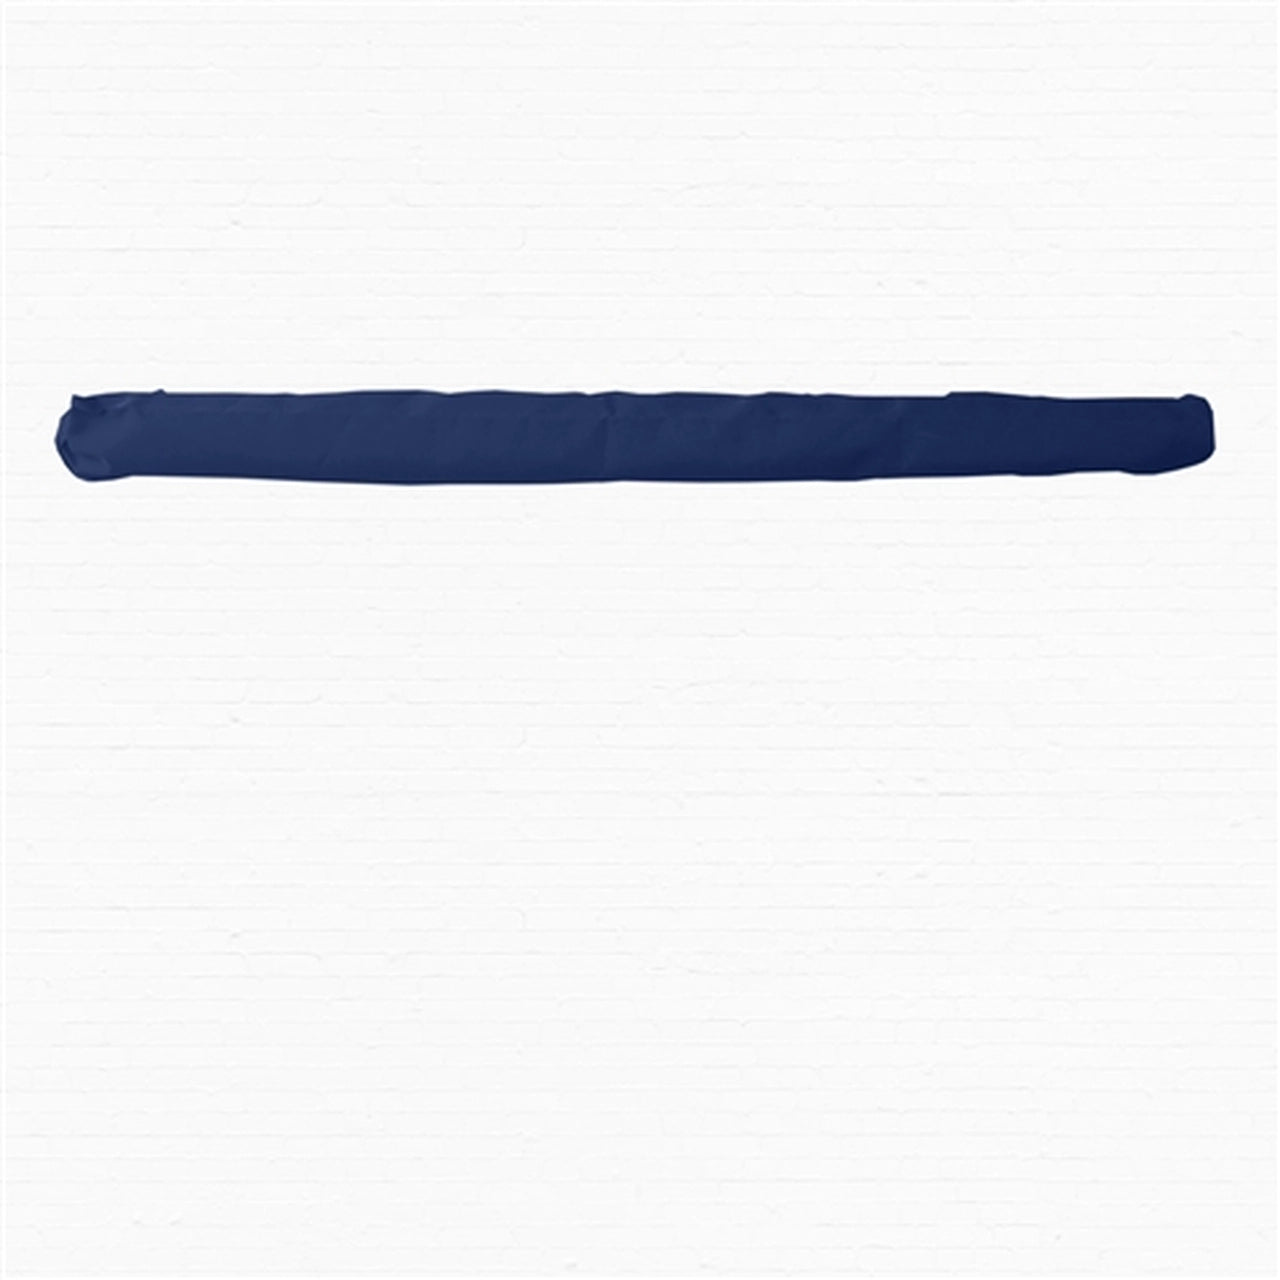 Aleko Protective Awning Cover - 16 x 10 Feet - Blue